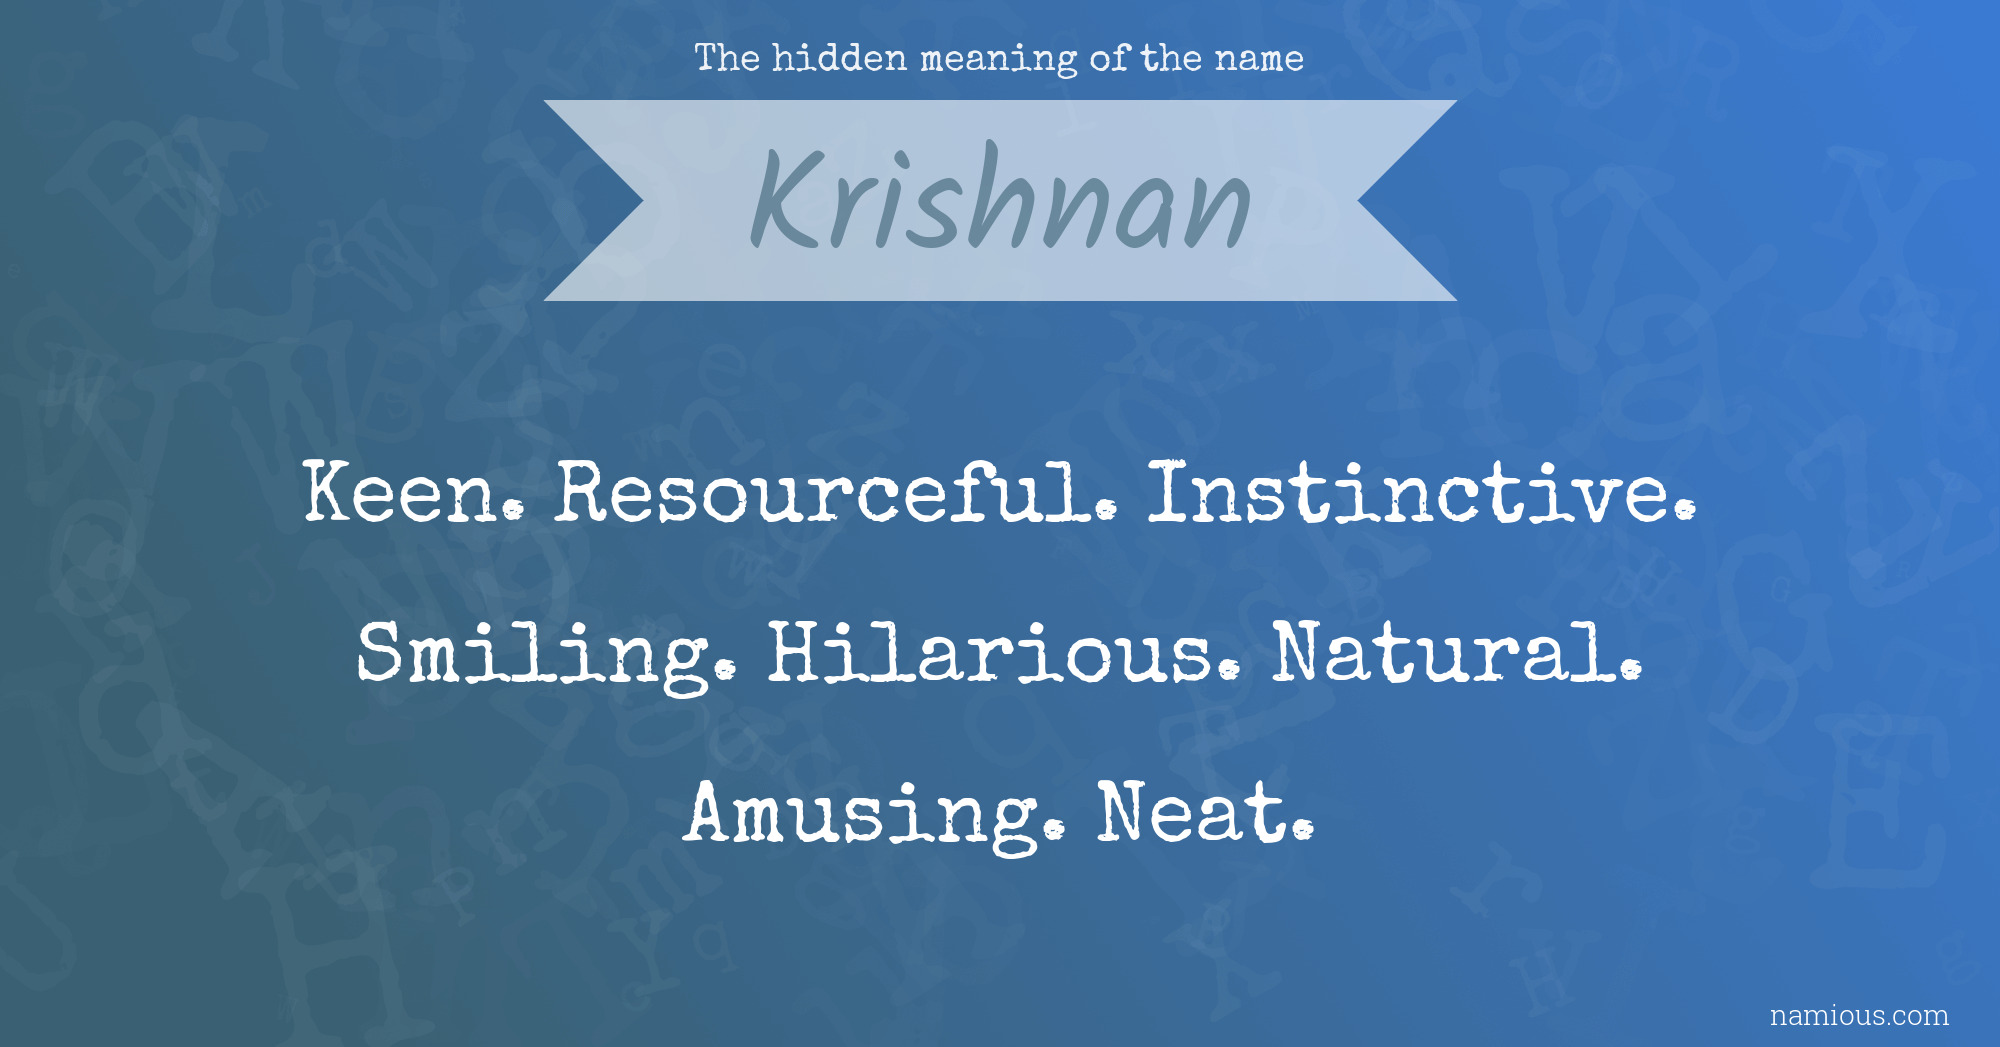 The hidden meaning of the name Krishnan